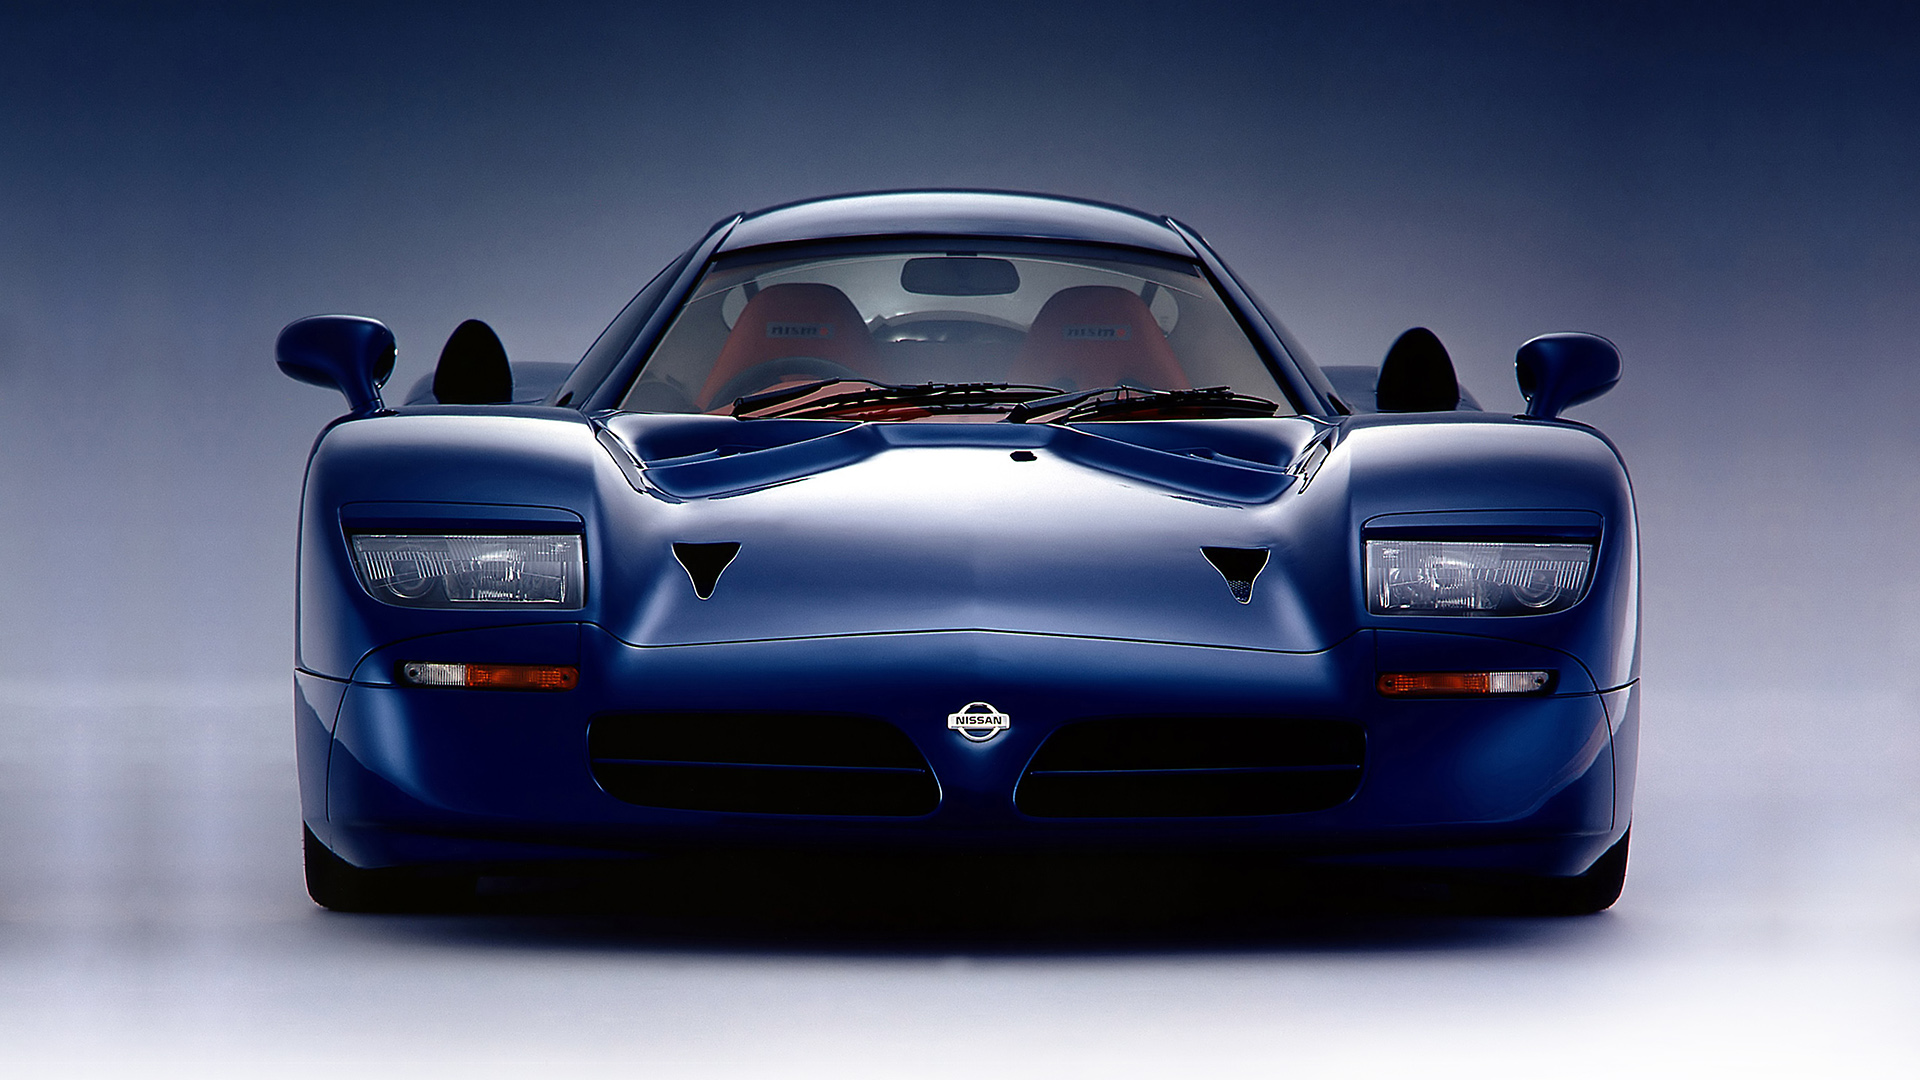 Nissan R390 Gt1 Wallpaper HD Image Wsupercars